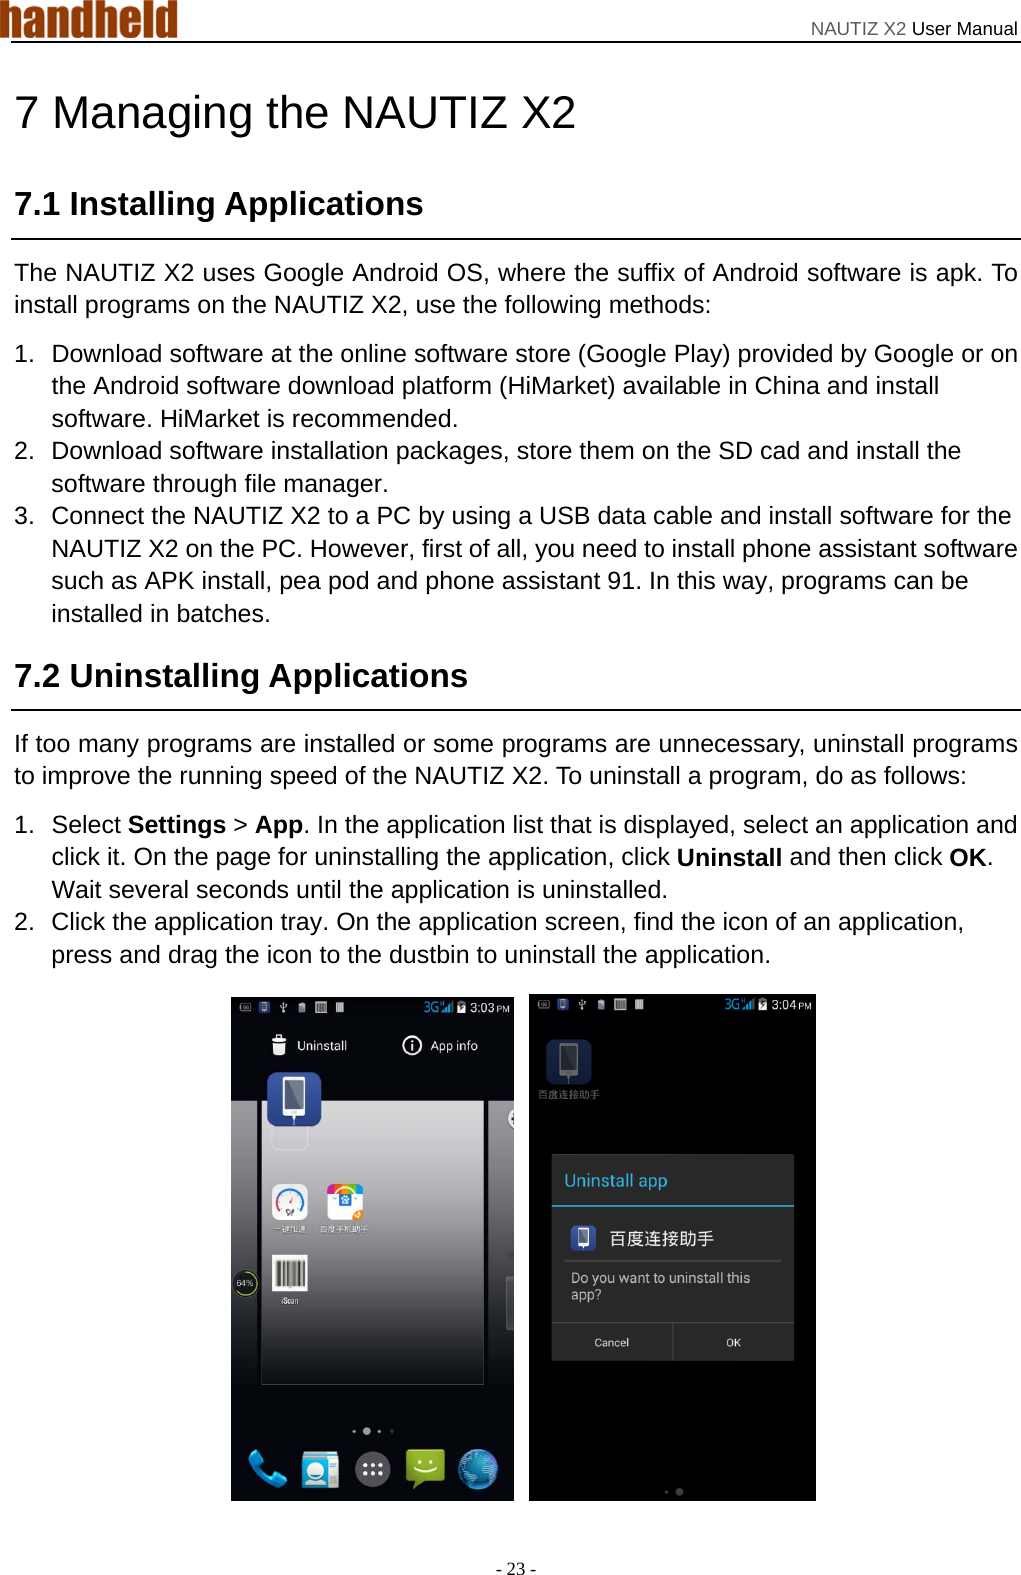 NAUTIZ X2 User Manual - 23 - 7 Managing the NAUTIZ X2 7.1 Installing Applications The NAUTIZ X2 uses Google Android OS, where the suffix of Android software is apk. To install programs on the NAUTIZ X2, use the following methods: 1.  Download software at the online software store (Google Play) provided by Google or on the Android software download platform (HiMarket) available in China and install software. HiMarket is recommended. 2.  Download software installation packages, store them on the SD cad and install the software through file manager. 3.  Connect the NAUTIZ X2 to a PC by using a USB data cable and install software for the NAUTIZ X2 on the PC. However, first of all, you need to install phone assistant software such as APK install, pea pod and phone assistant 91. In this way, programs can be installed in batches. 7.2 Uninstalling Applications If too many programs are installed or some programs are unnecessary, uninstall programs to improve the running speed of the NAUTIZ X2. To uninstall a program, do as follows: 1. Select Settings &gt; App. In the application list that is displayed, select an application and click it. On the page for uninstalling the application, click Uninstall and then click OK. Wait several seconds until the application is uninstalled. 2.  Click the application tray. On the application screen, find the icon of an application, press and drag the icon to the dustbin to uninstall the application.     